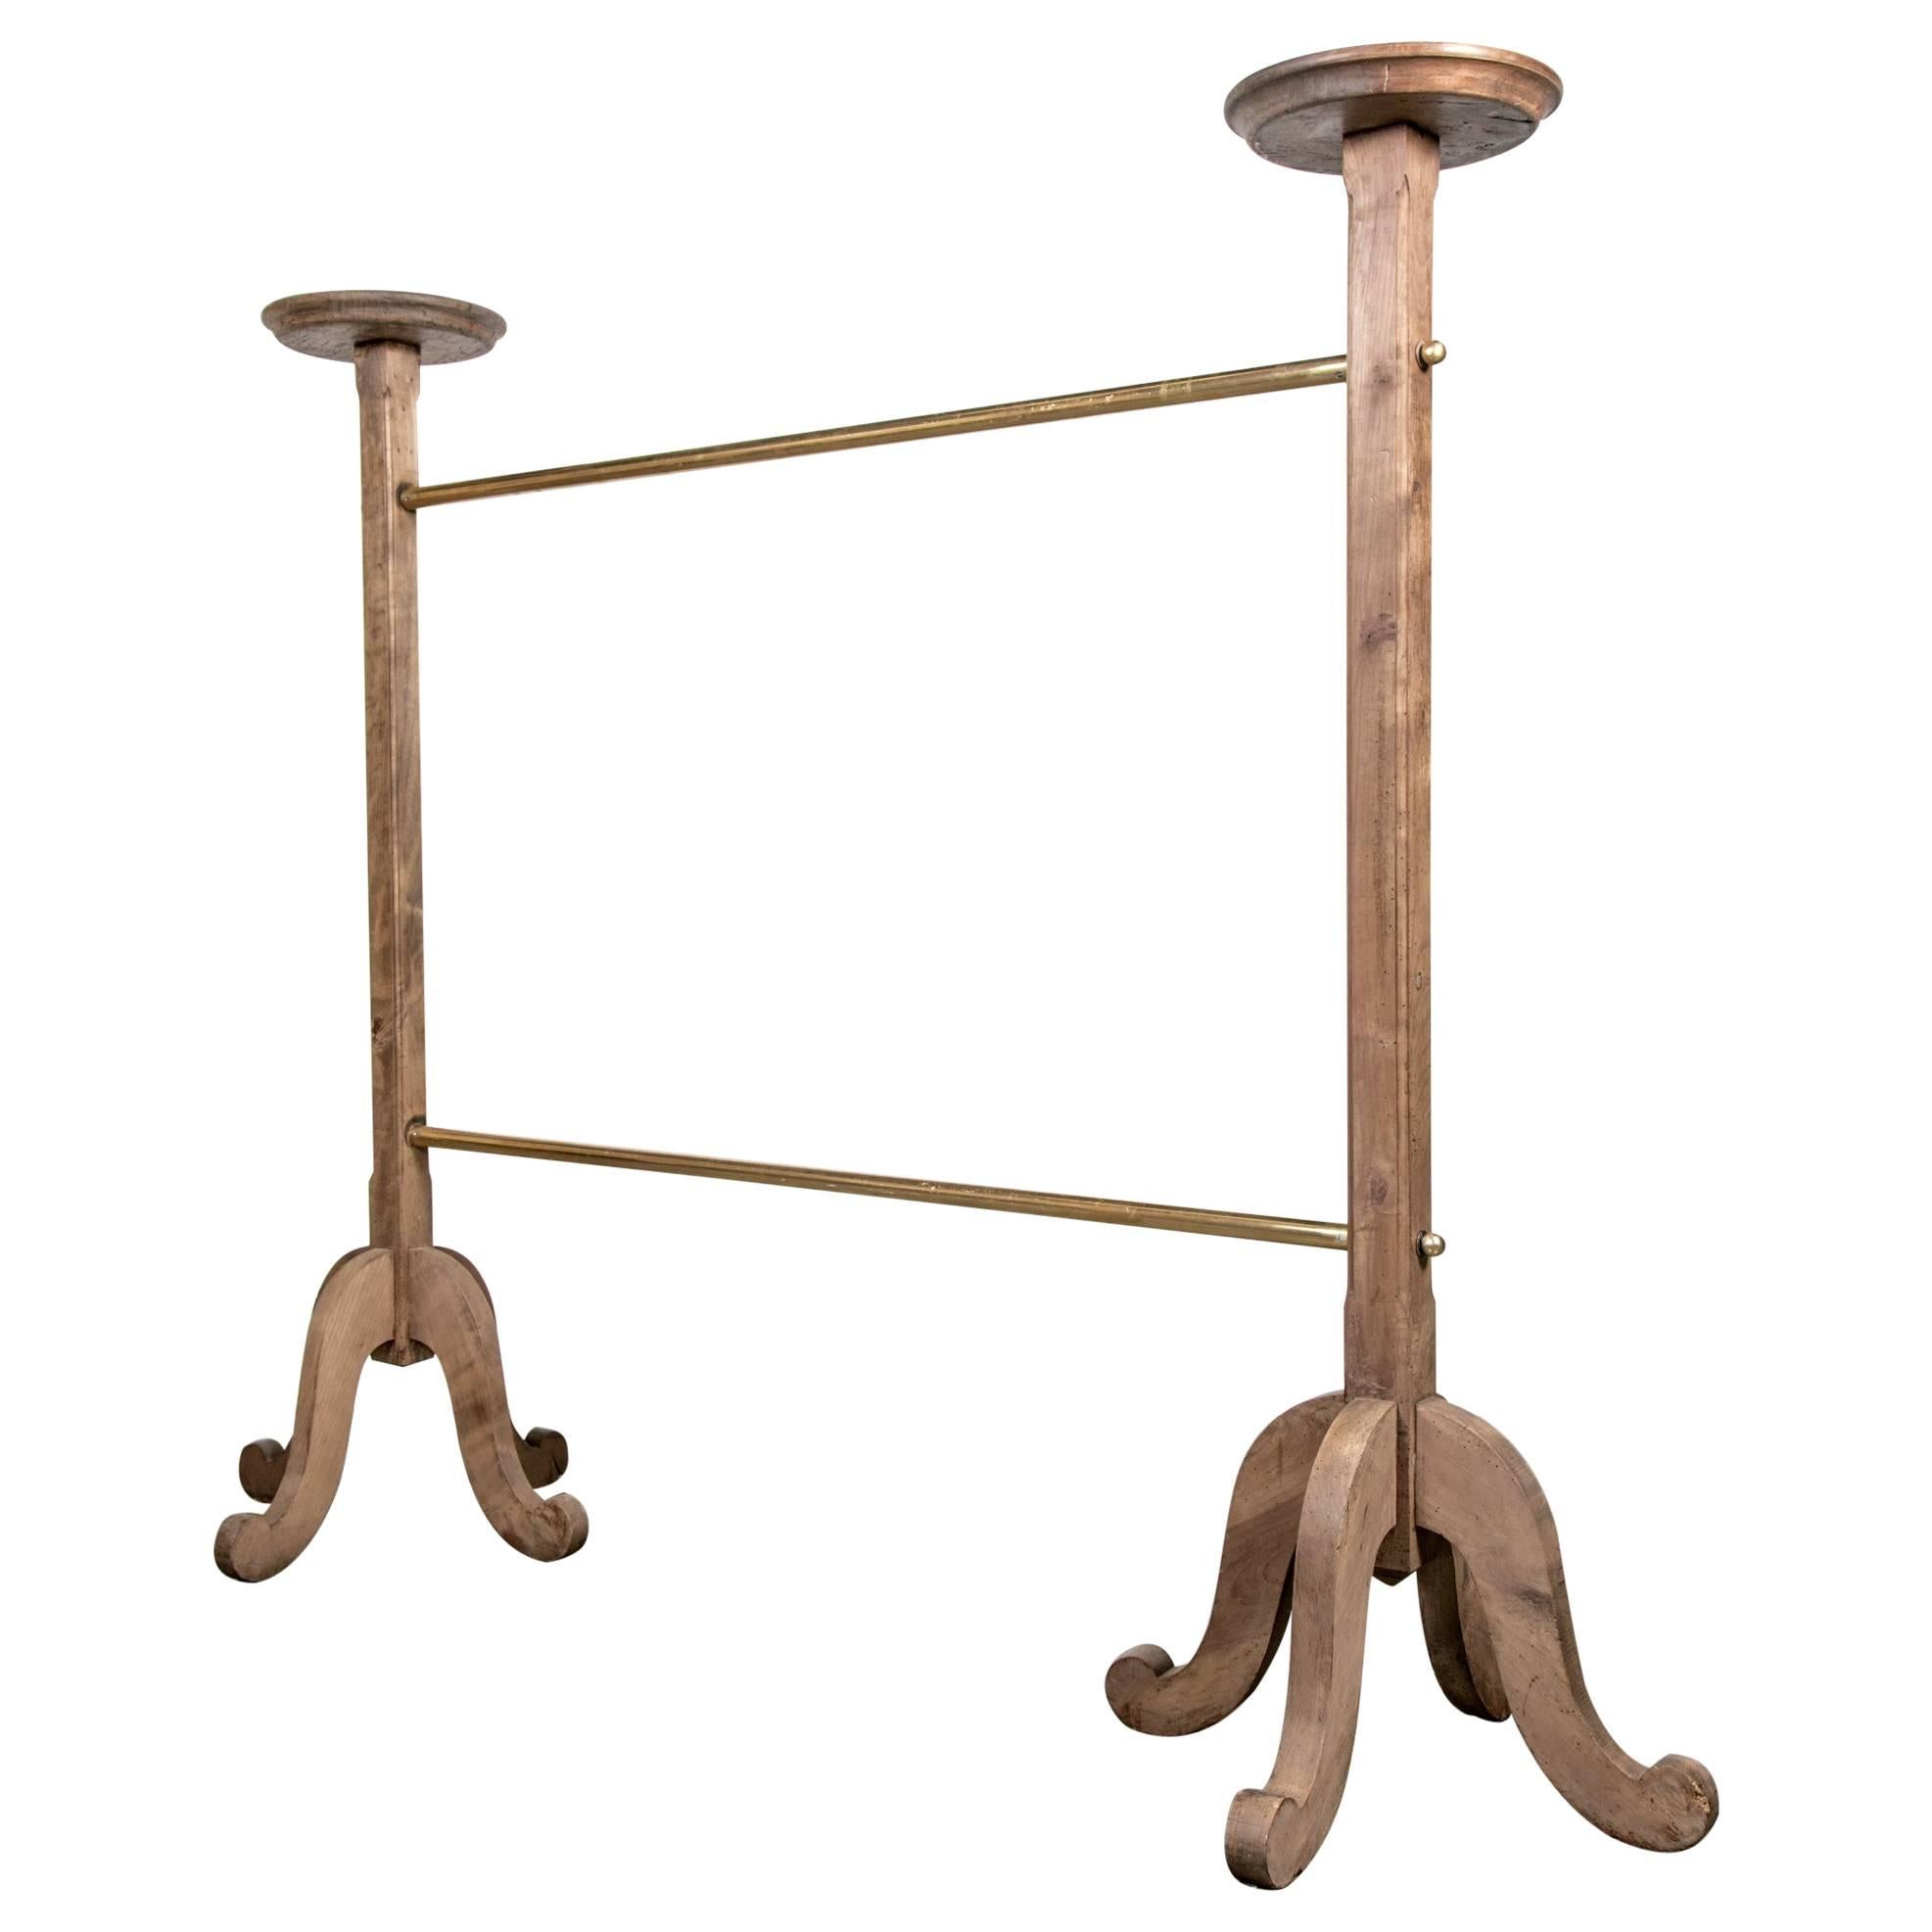 Parisian Brass and Bleached Oak Garment or Clothing Rack from Galeries Lafayette